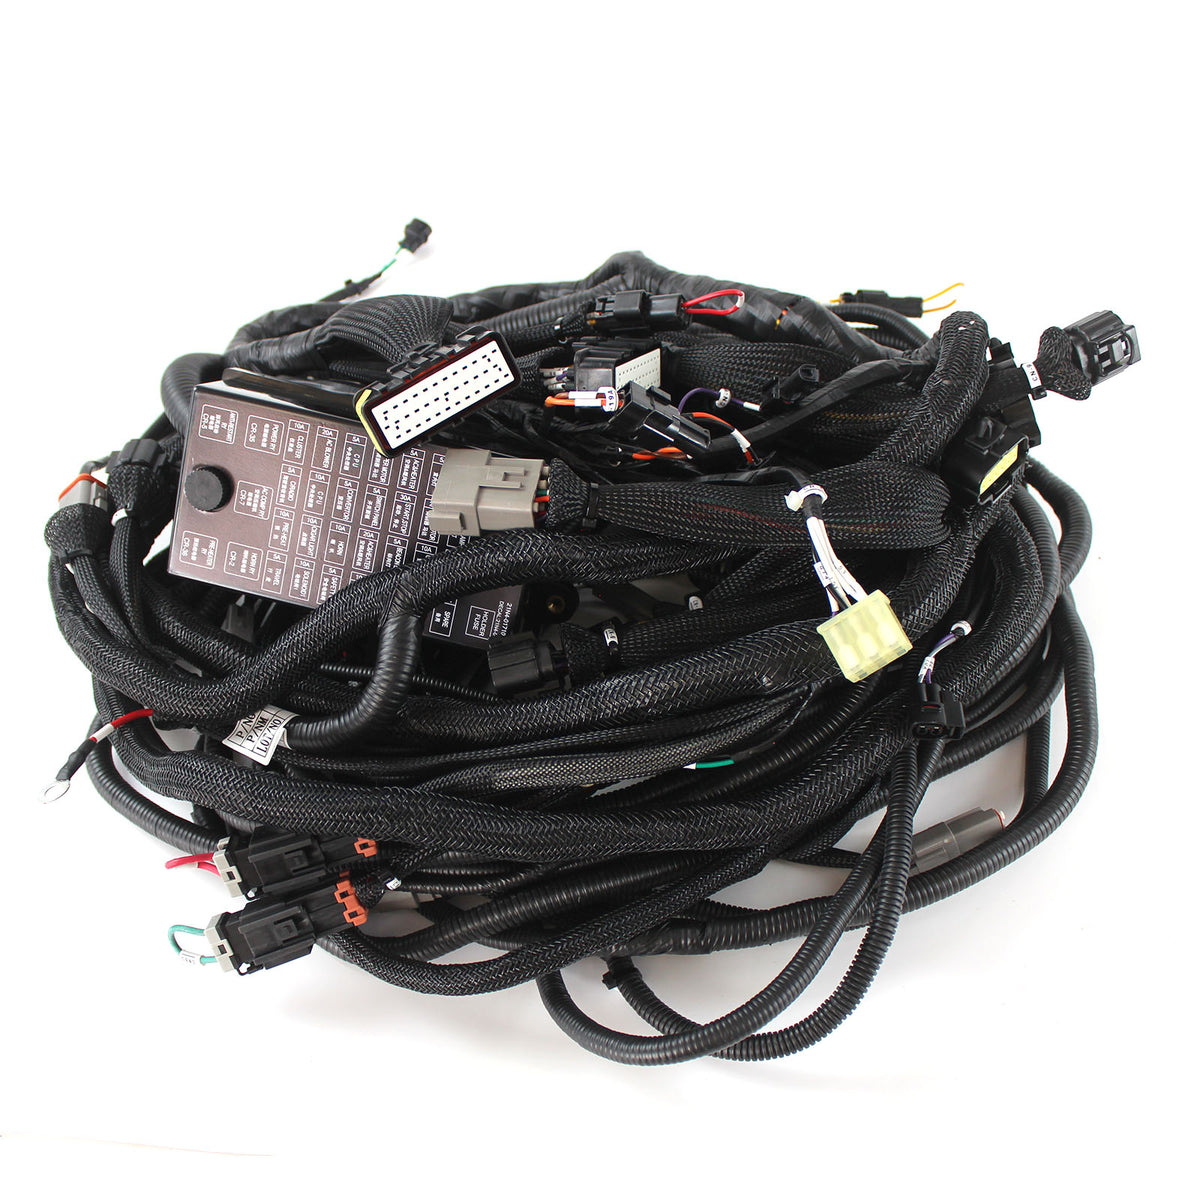 21N8-12153 Excavator Wiring Harness for Hyundai R305LC-7 R210LC-7